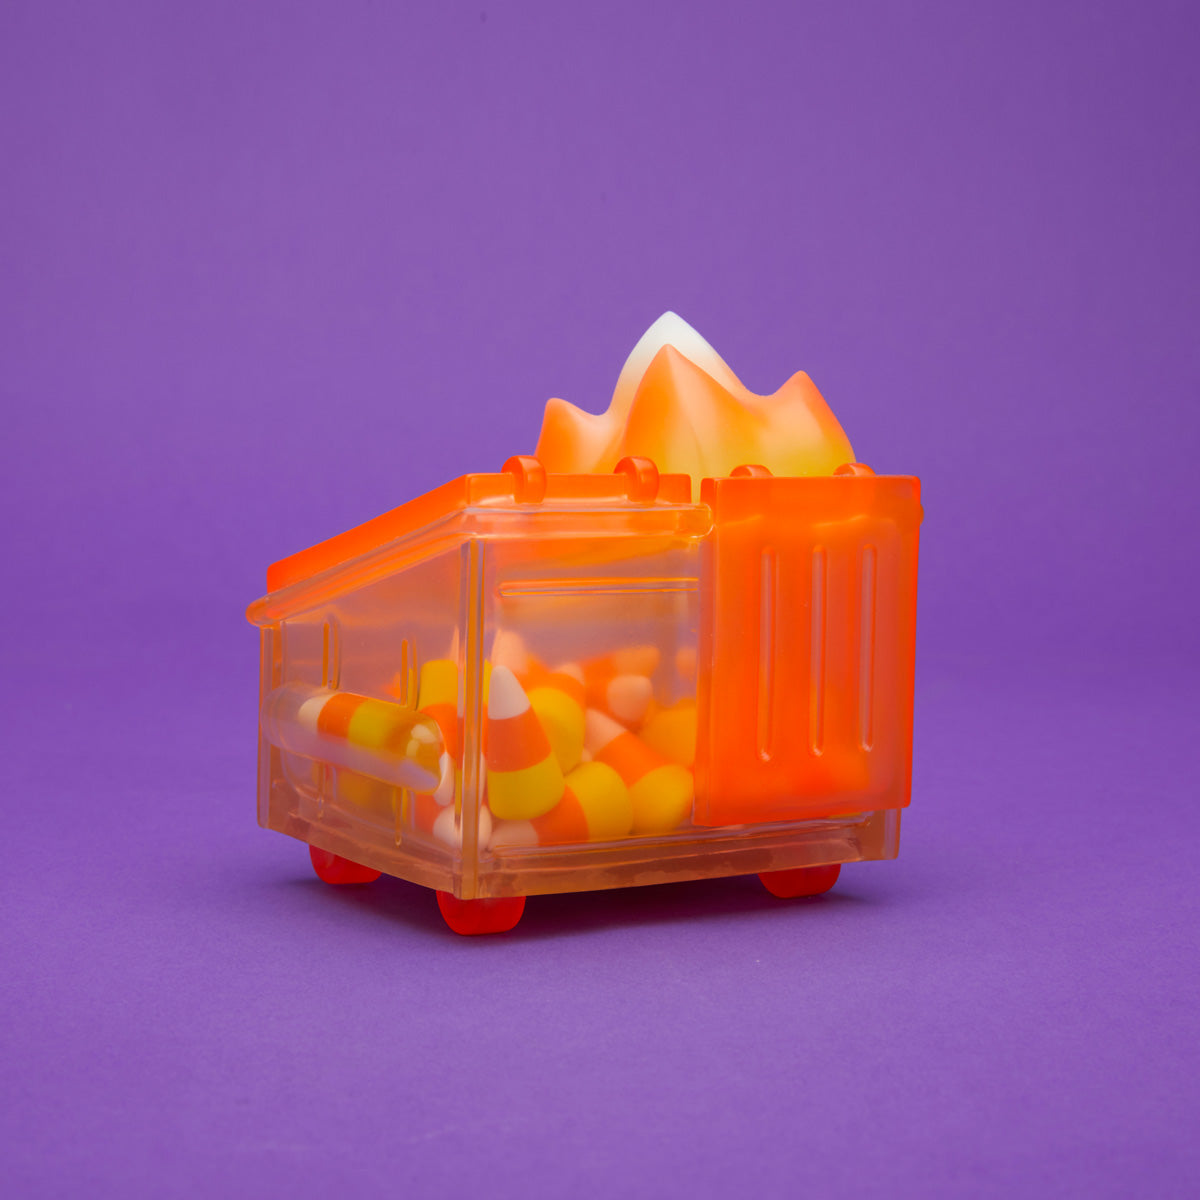 Orange translucent Dumpster Fire filled with candy corn and a yellow, orange, and white flame, pictured with its box.